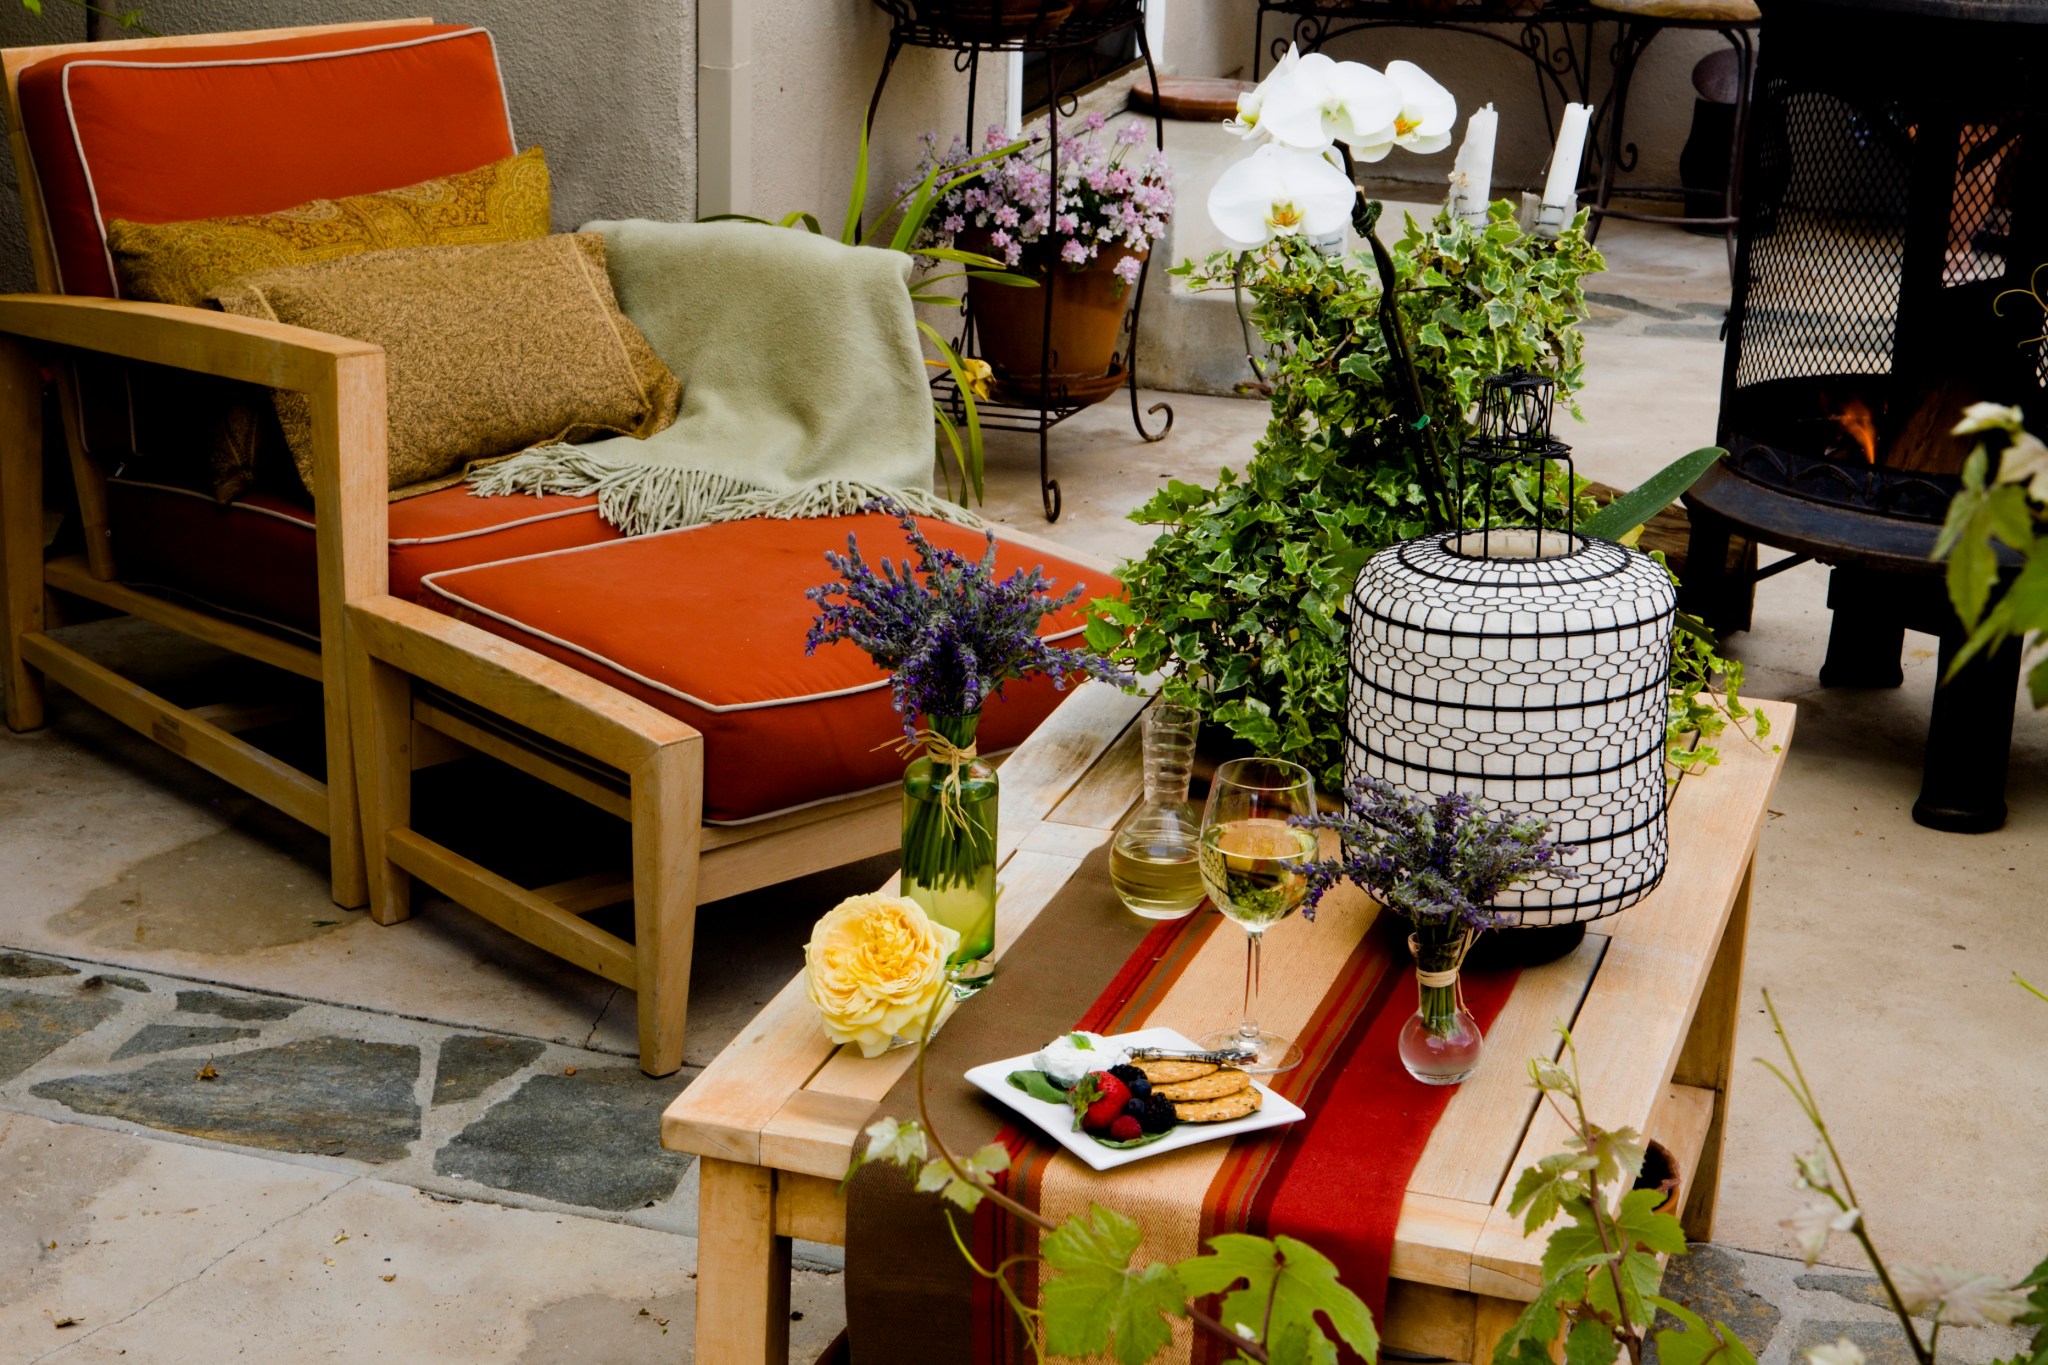 outdoor living space has colorful chair, ottoman and table next to fire pit and lots of plants on patio